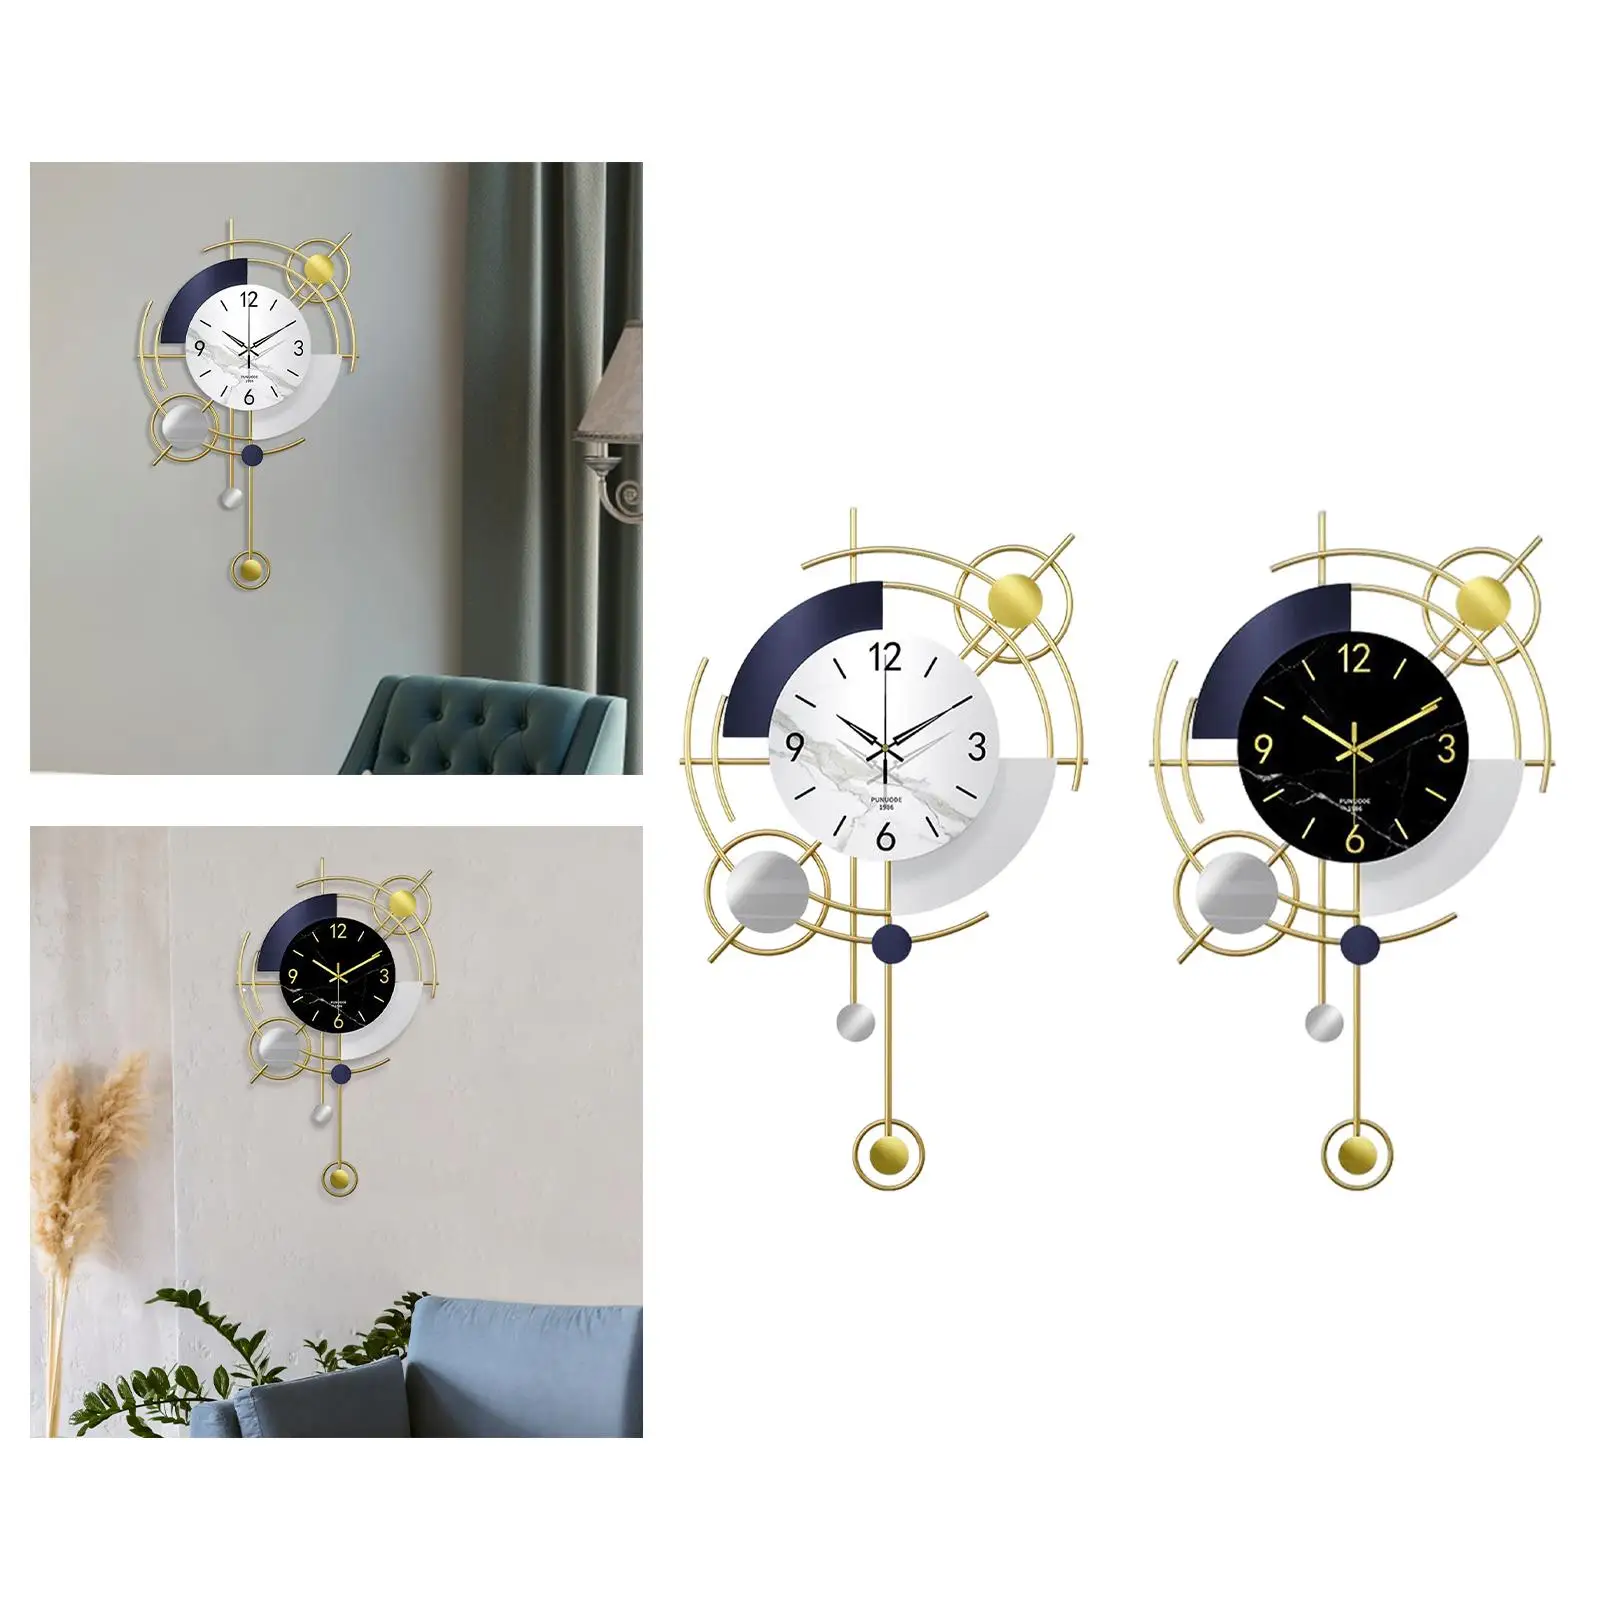 Modern Wall Clock Retro Style Hanging Mute Battery Operated No Ticking Metal for Home Office Bedroom Kitchen Decoration